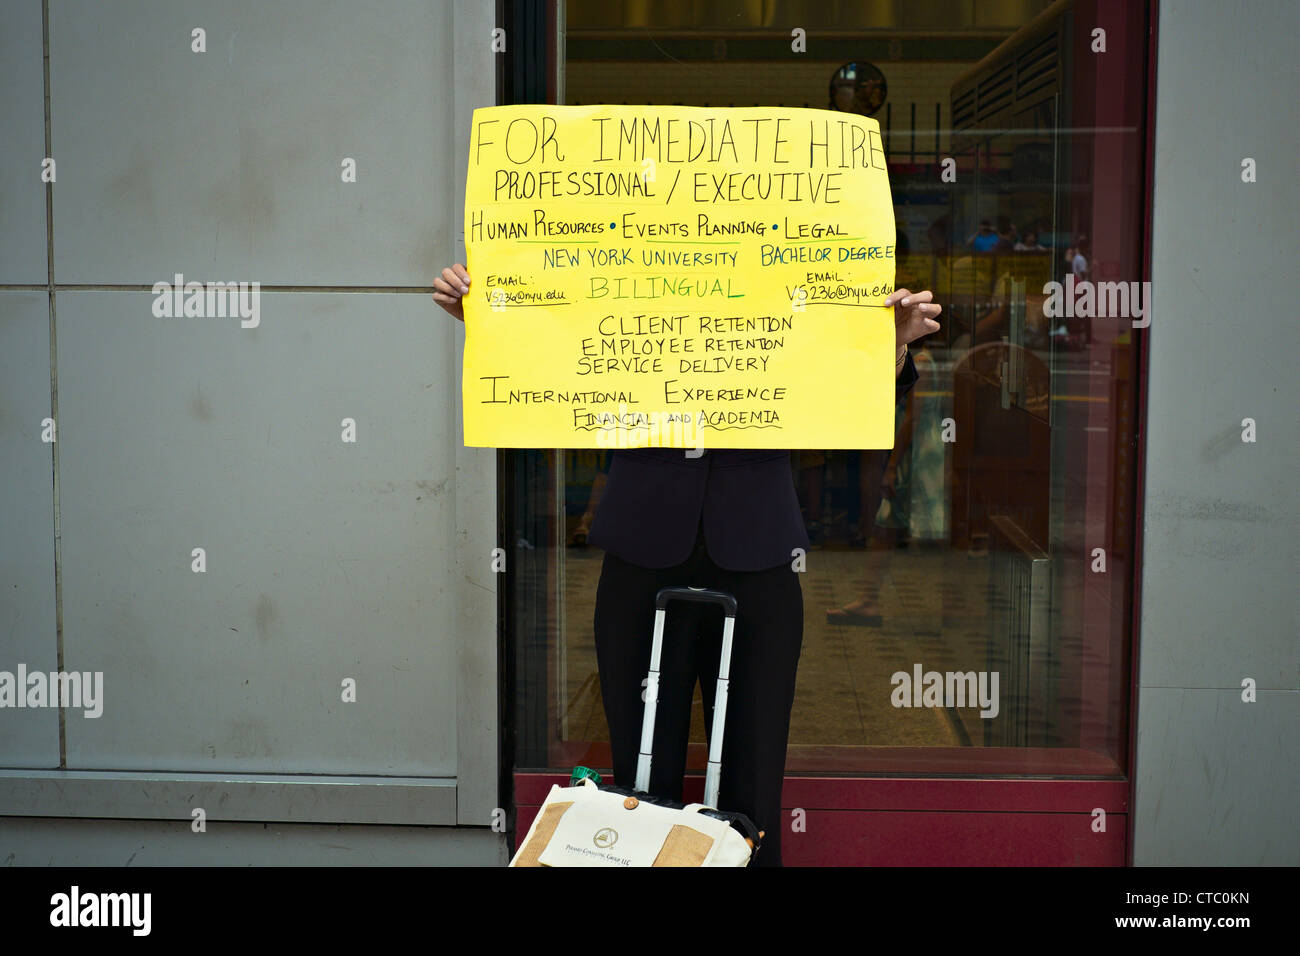 Vilmarie Santos, who says she is unemployed, holding sign seeking work, near Times Square, New York, NY, US Stock Photo